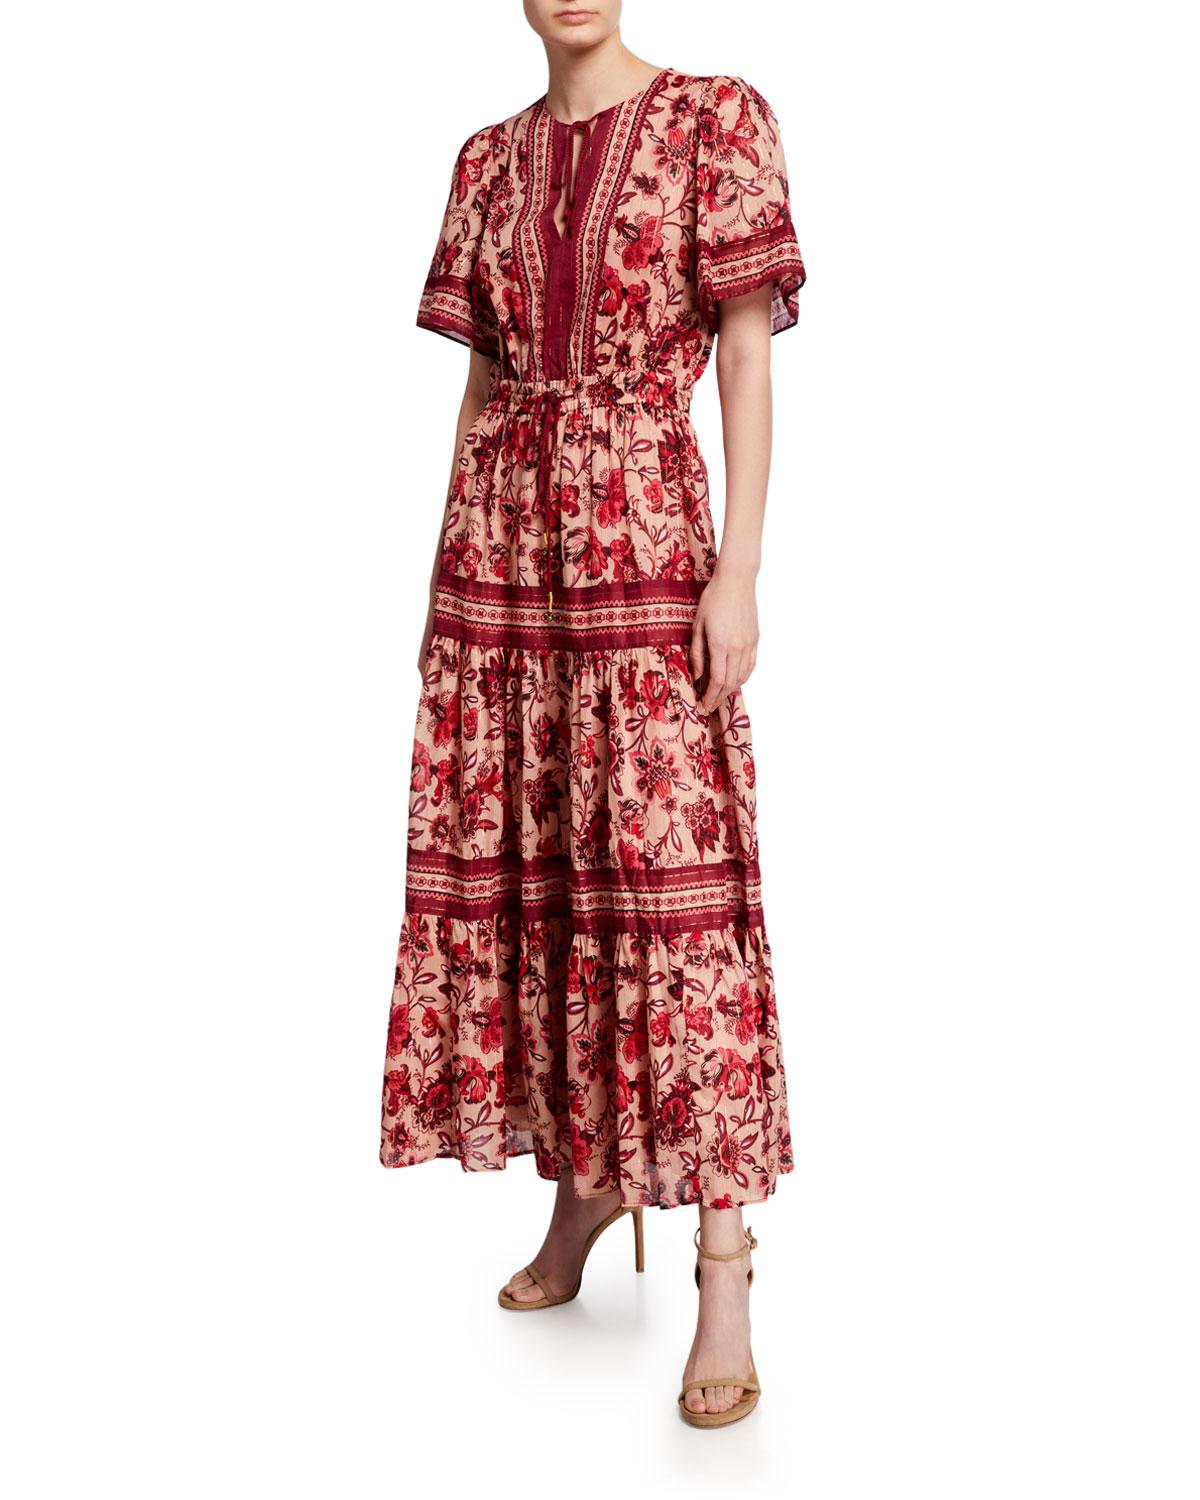 Kate Spade Cotton Paisley Blossom Maxi Dress in Red - Lyst